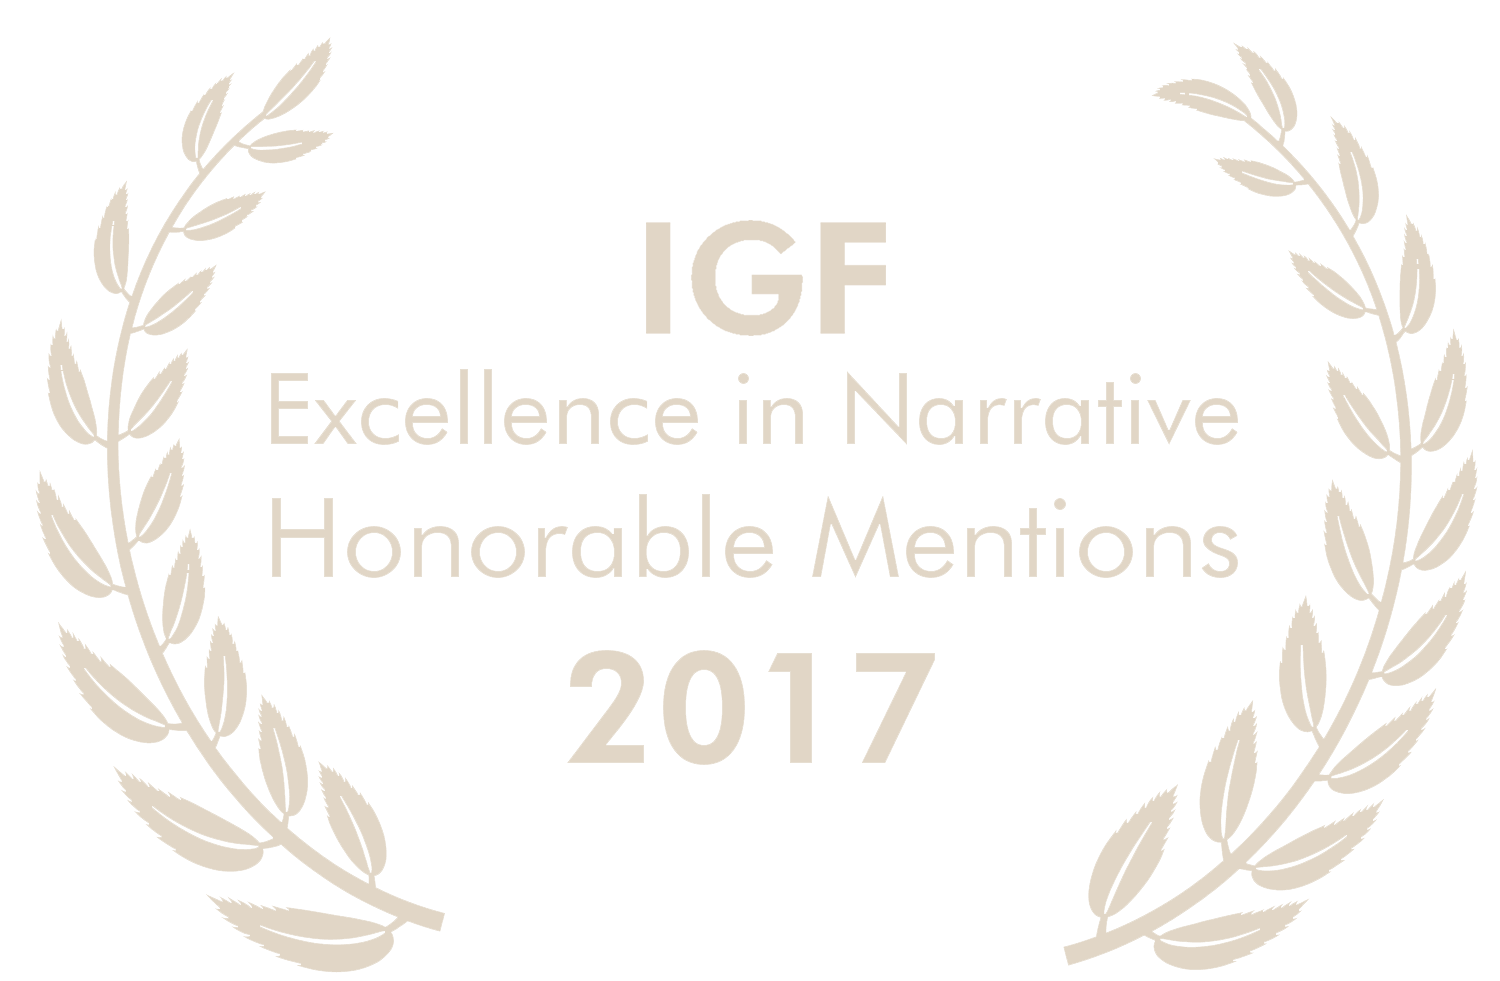 Honorable Mentions Excellence in Narrative 2017